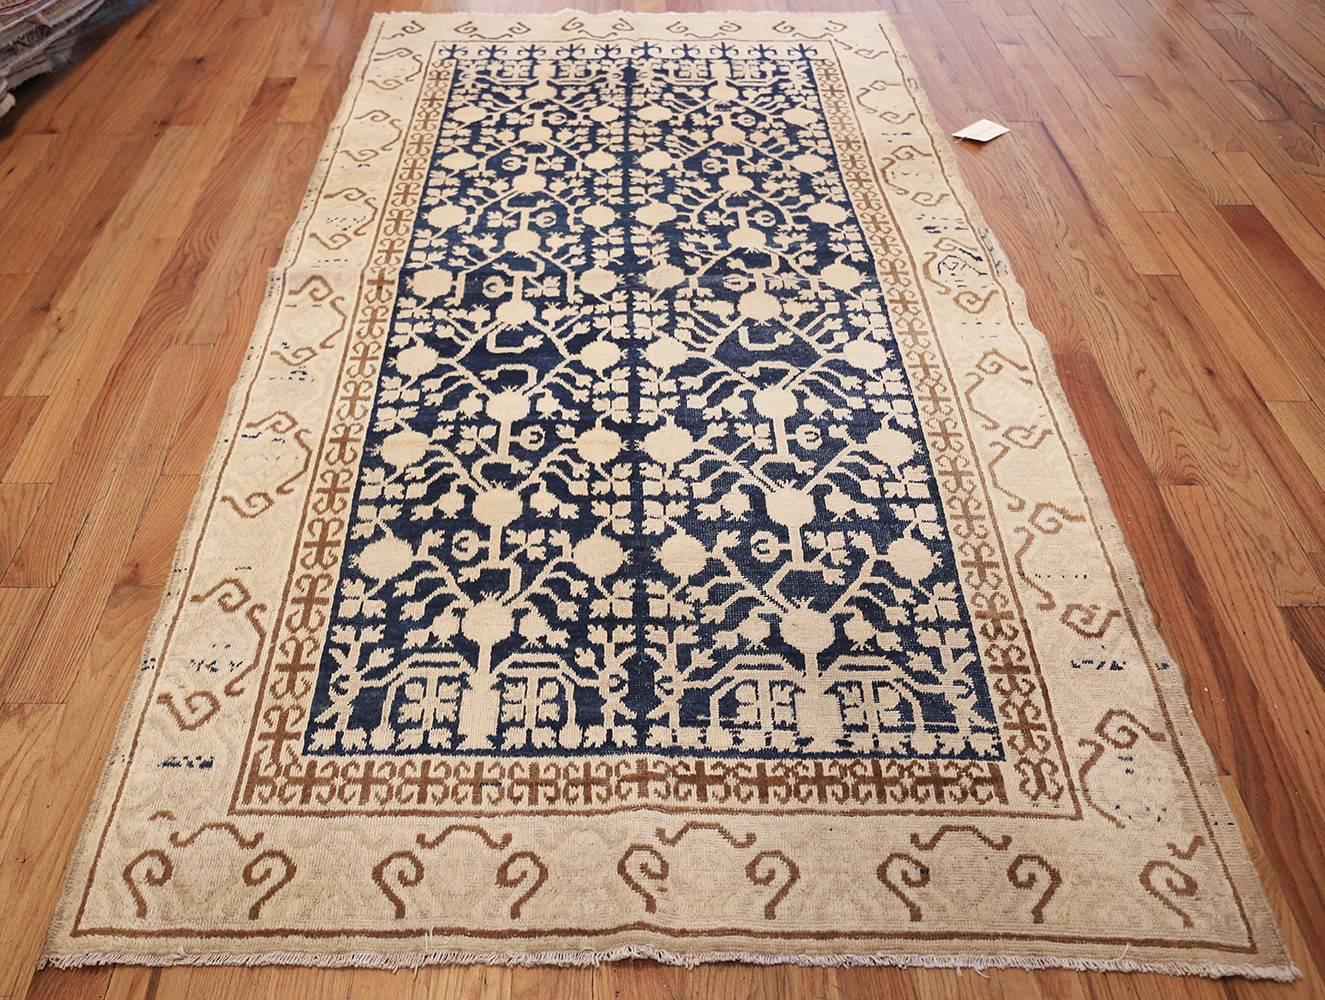 Beautiful Light Blue Small size Pomegranate Design Antique Khotan Rug, Country of Origin: East Turkestan, Circa Date: Early 20th Century. Size: 4 ft 6 in x 8 ft 3 in (1.37 m x 2.51 m)

This elegantly understated antique Khotan rug, from East